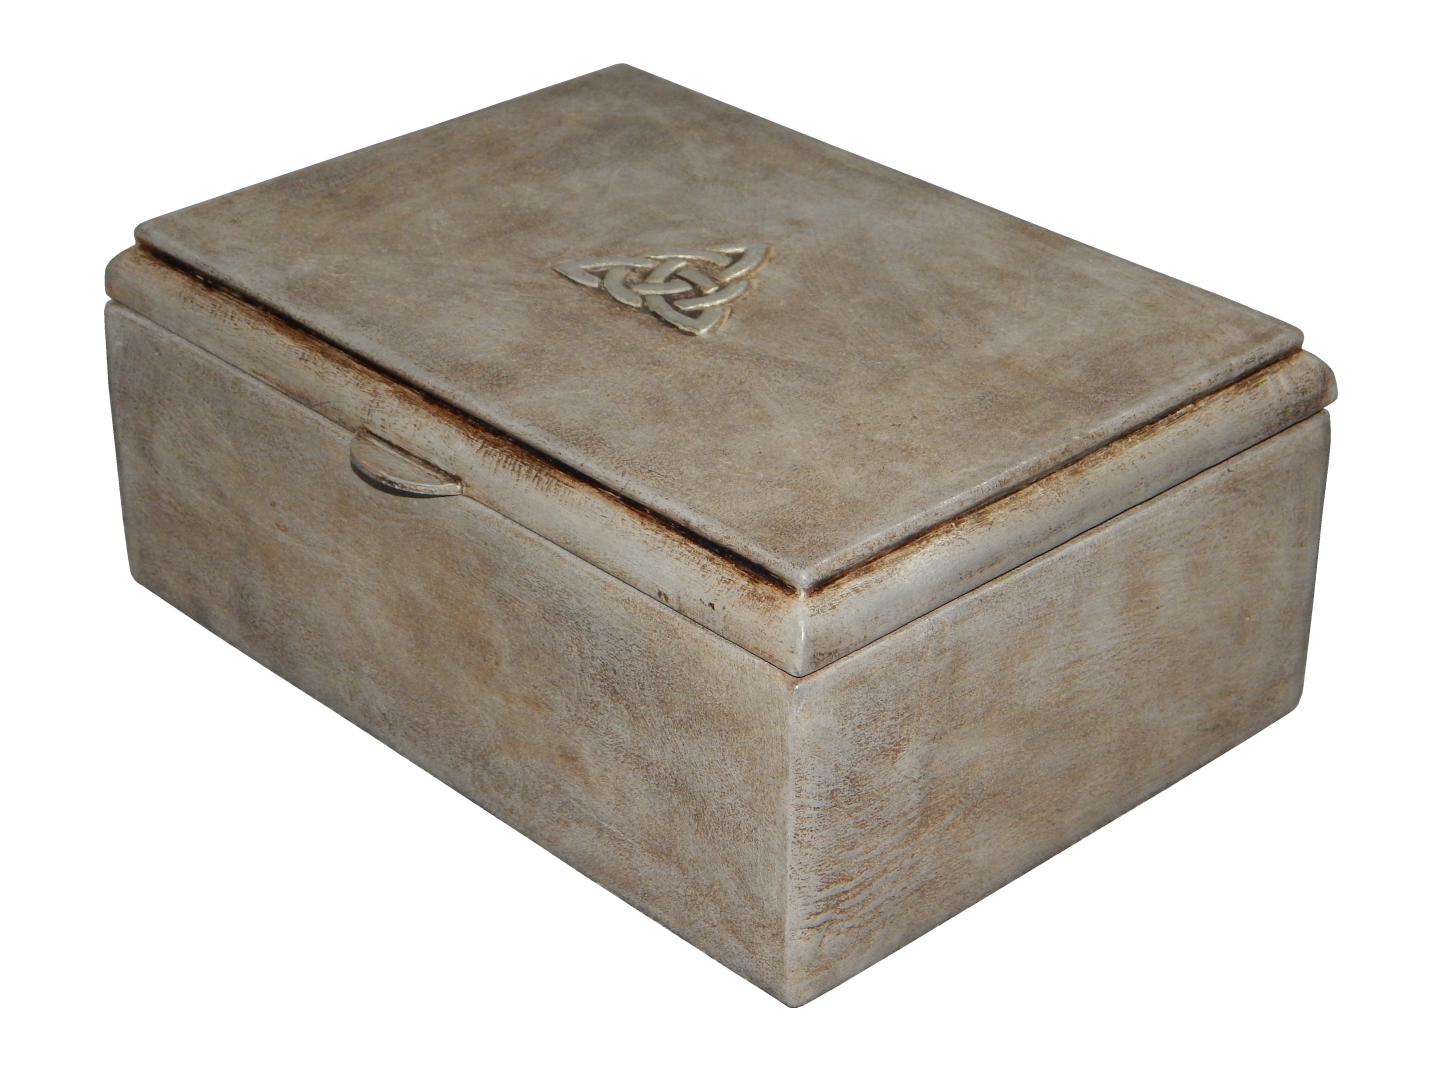 leather box with a silver celtic desing on top of the box